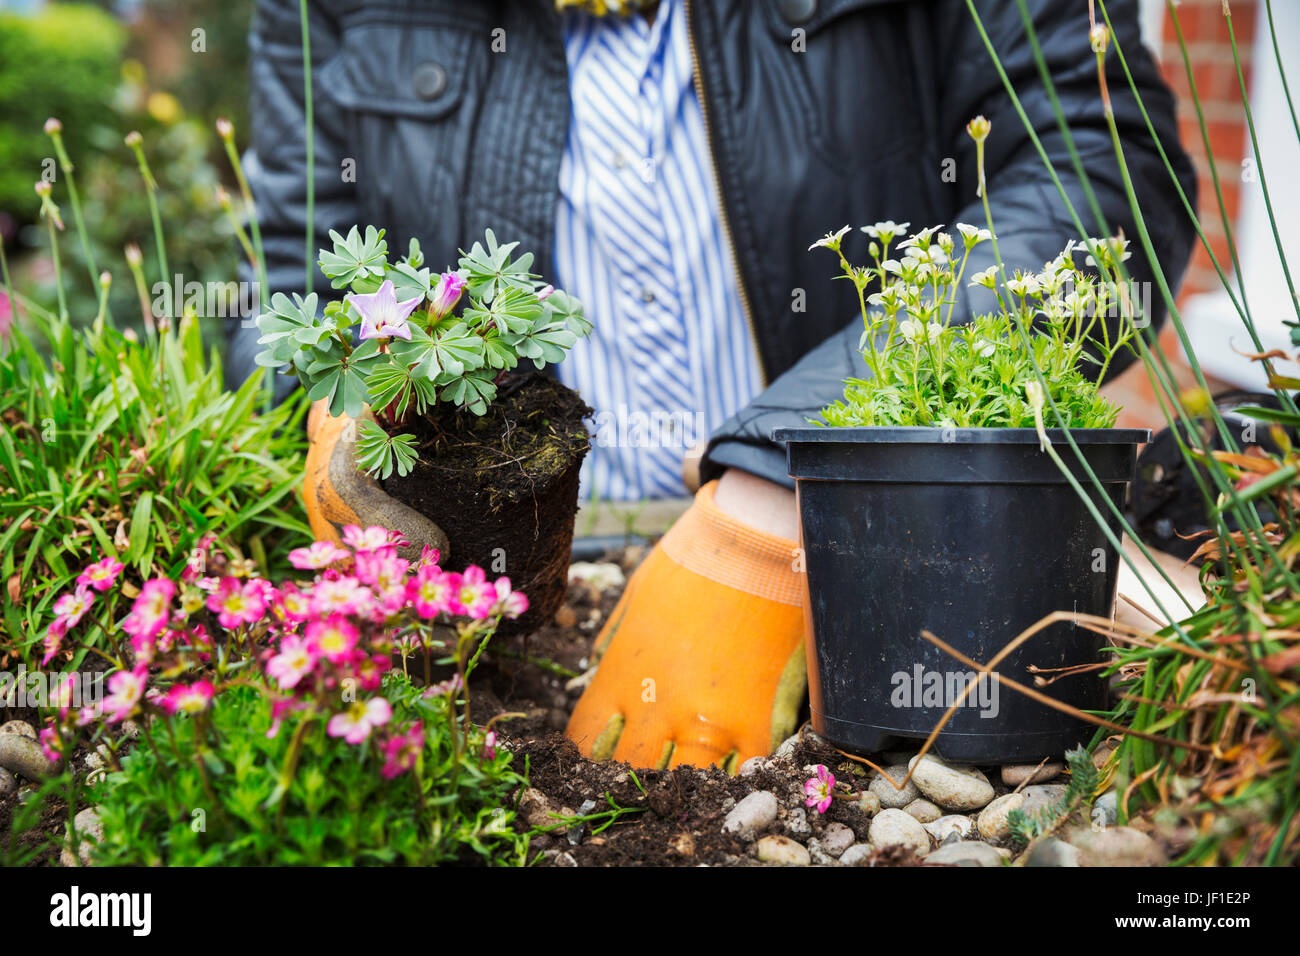 Close up of person wearing gardening gloves planting flower in a flower bed. Stock Photo